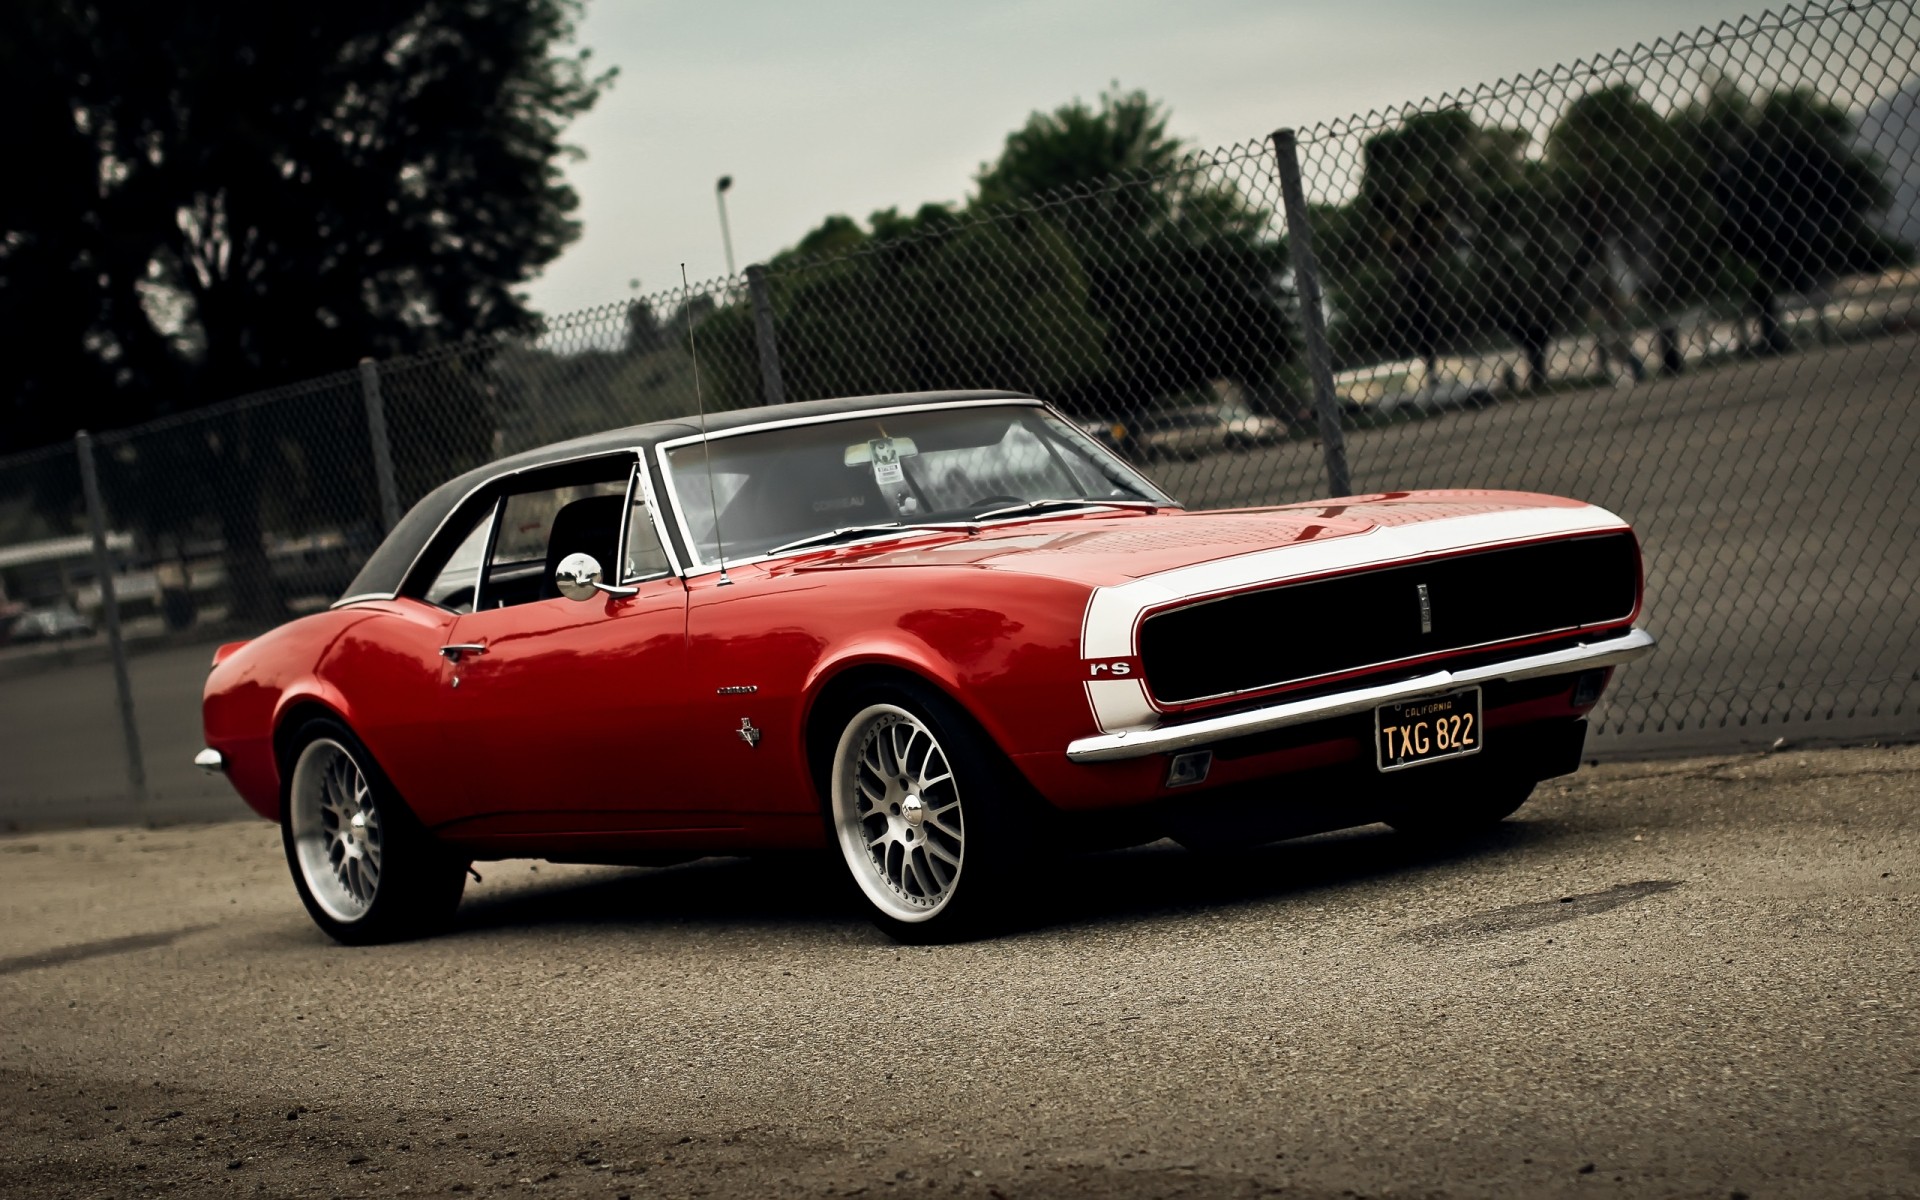 Old Muscle Car HD Picture Wallpaper Site